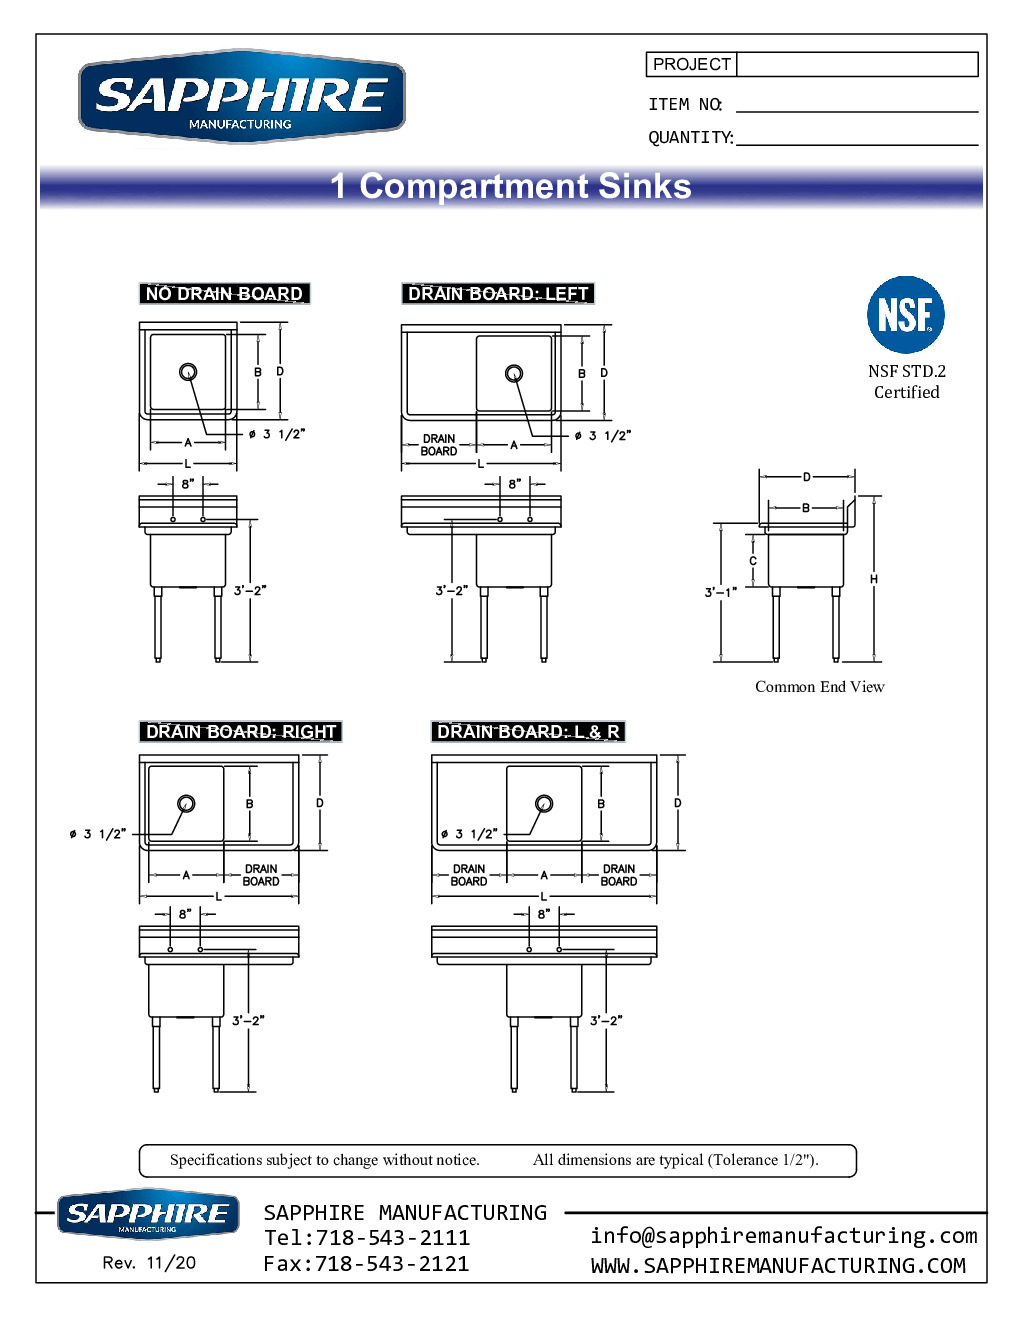 Sapphire Manufacturing SMS2020 (1) One Compartment Sink